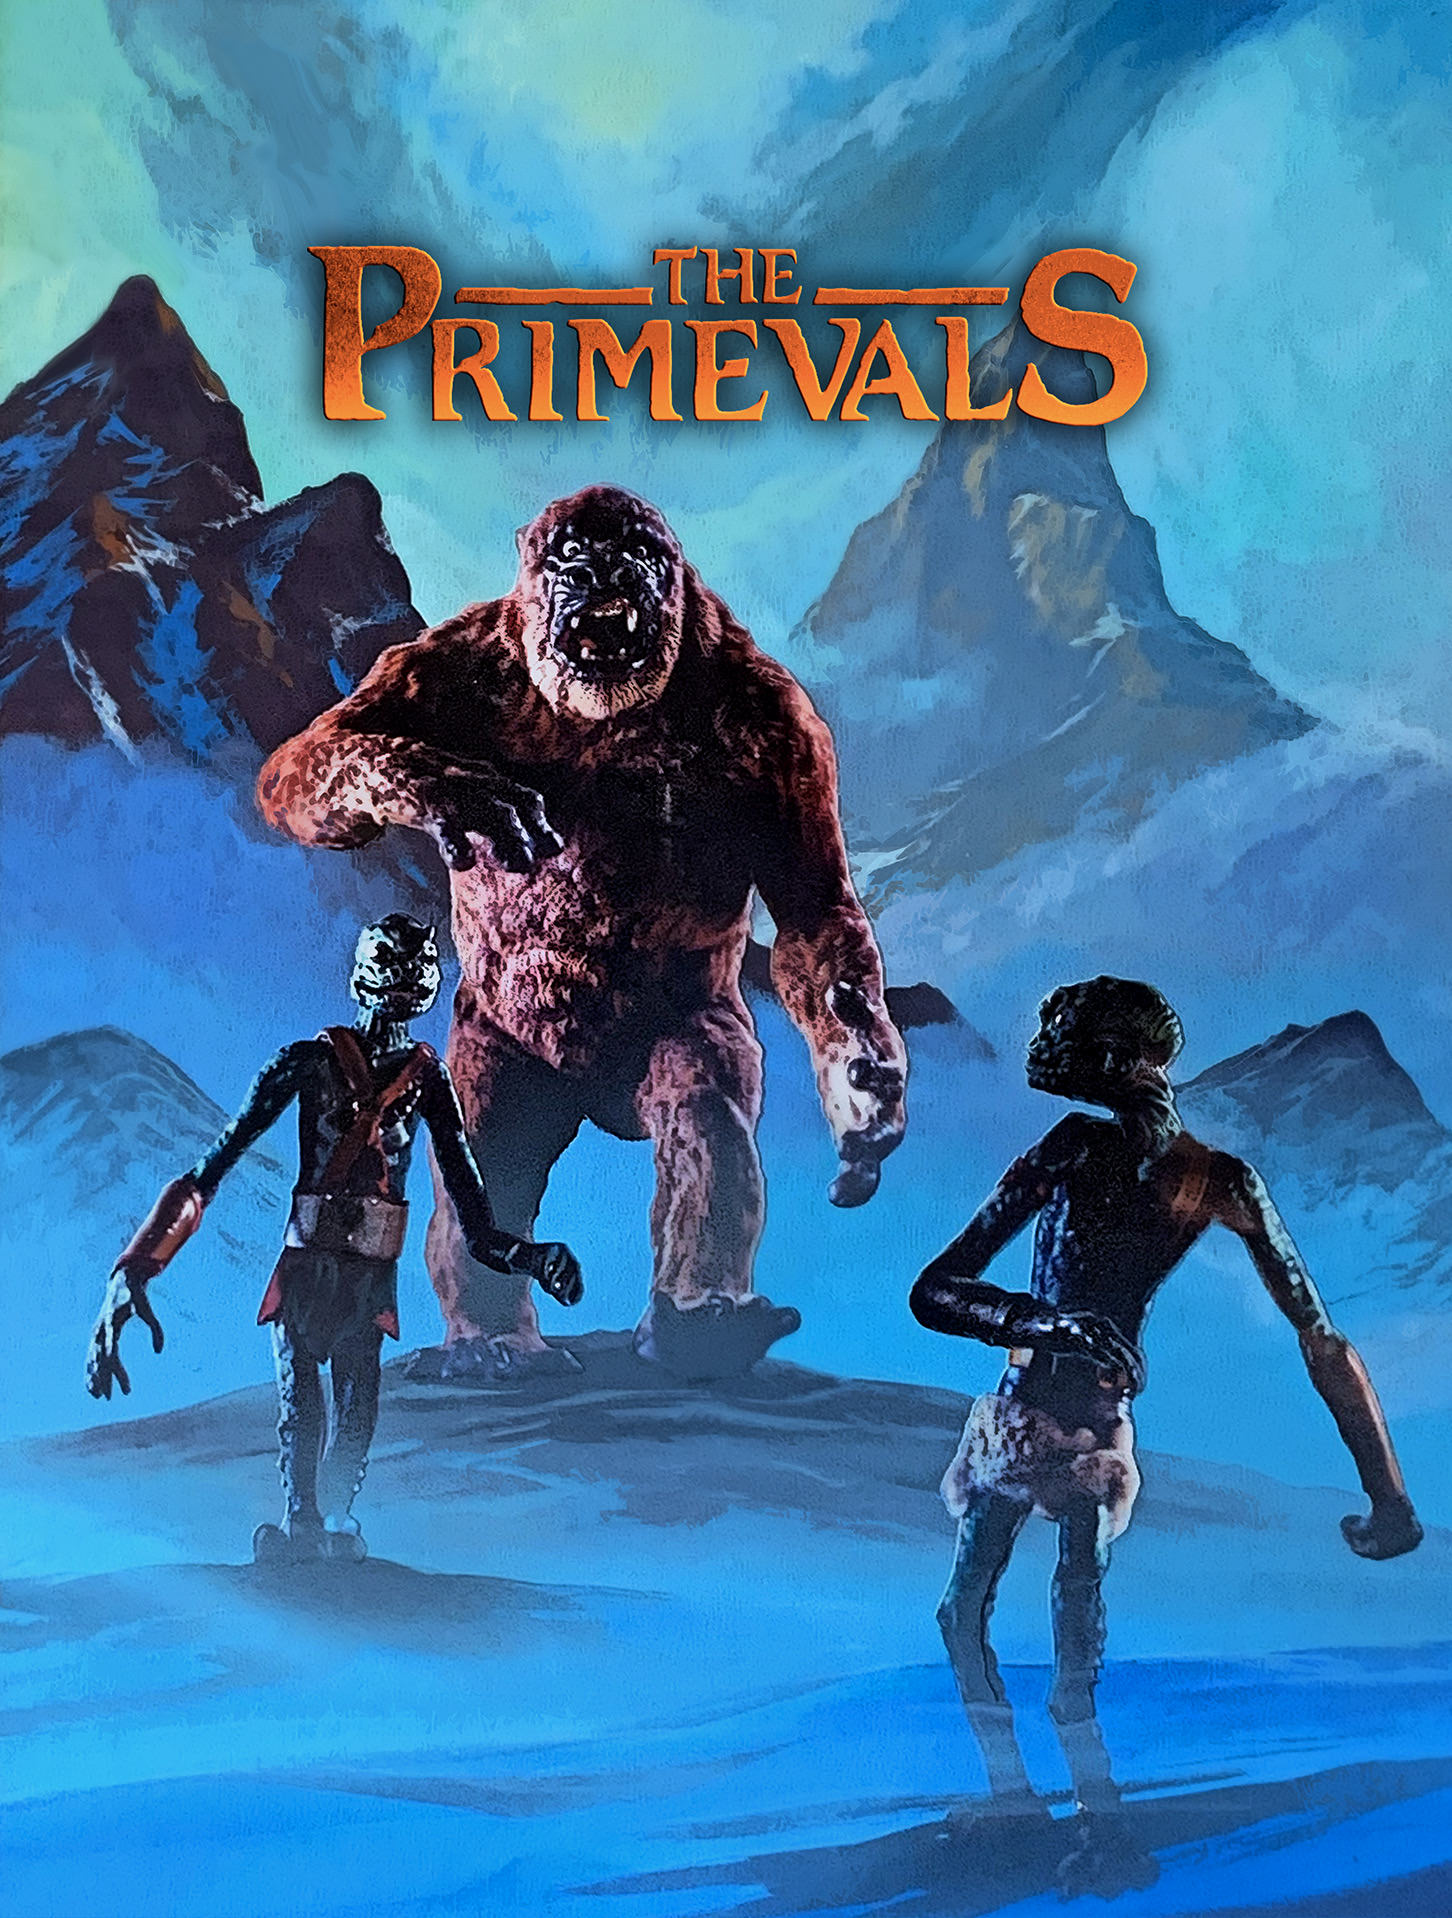 'The Primevals' Movie Poster. Photo Credit: Full Moon Features